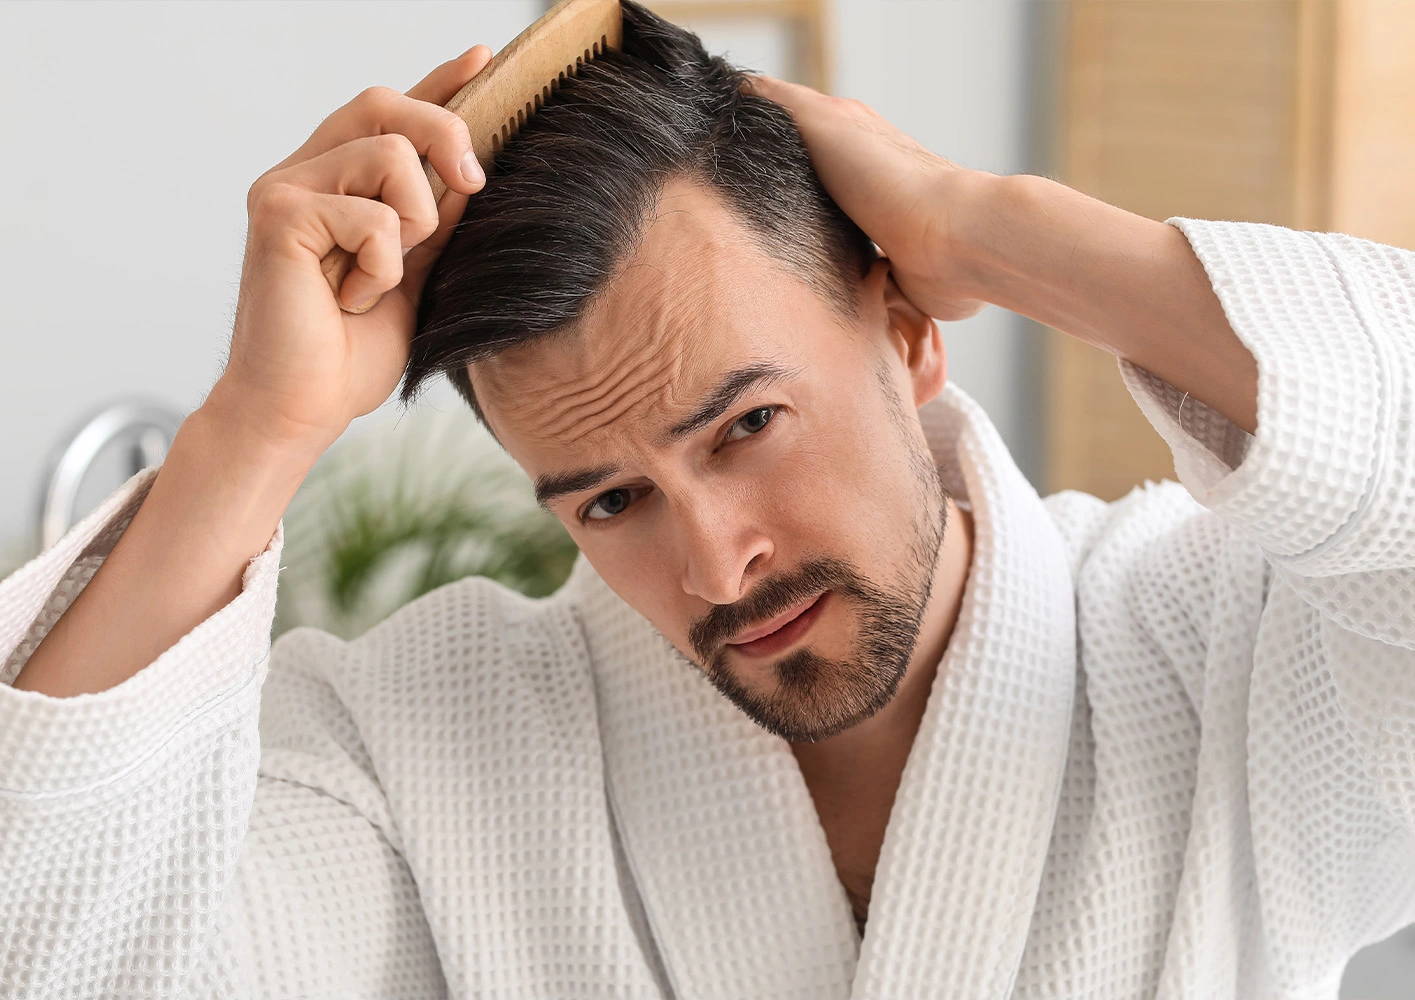 The Most Common Impacts Hair Loss Has On a Man’s Life